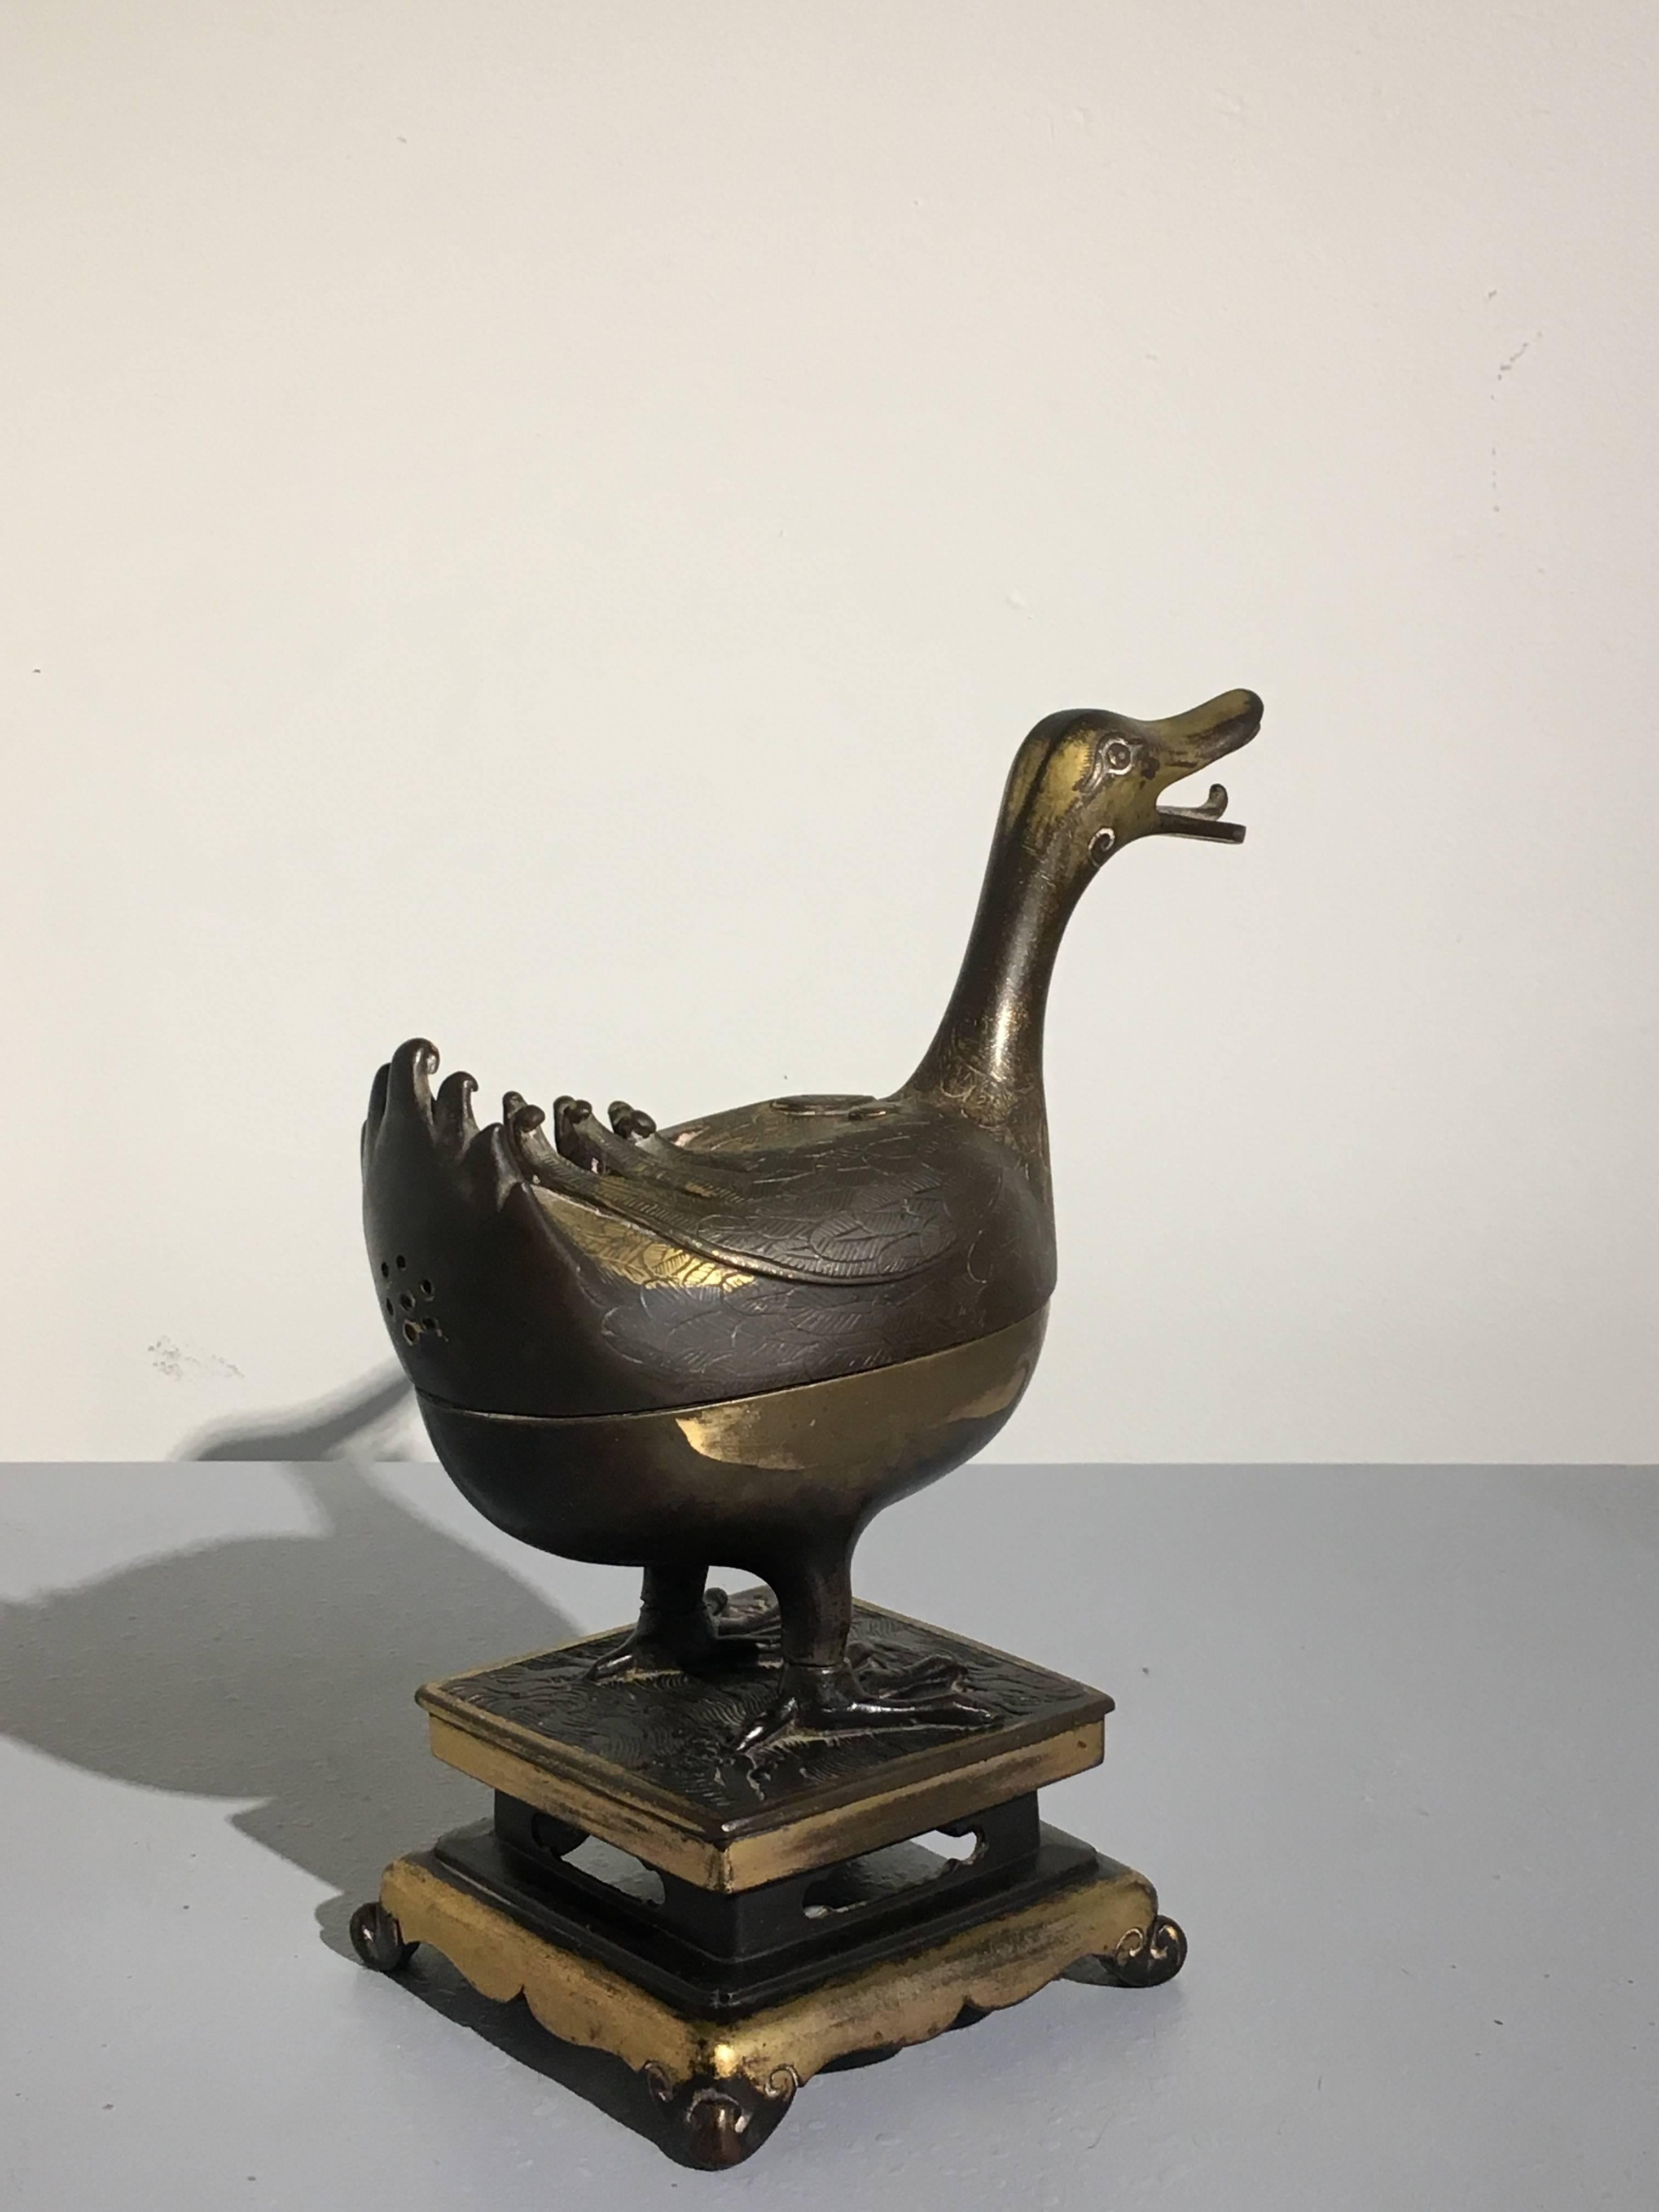 A fine and rare Chinese gilt bronze duck form censer, late Ming dynasty, 17th century. 

The noble duck portrayed in a standing position upon a separately cast and parcel gilt bronze stand shaped as a high waisted incesne stand with upturned ruyi